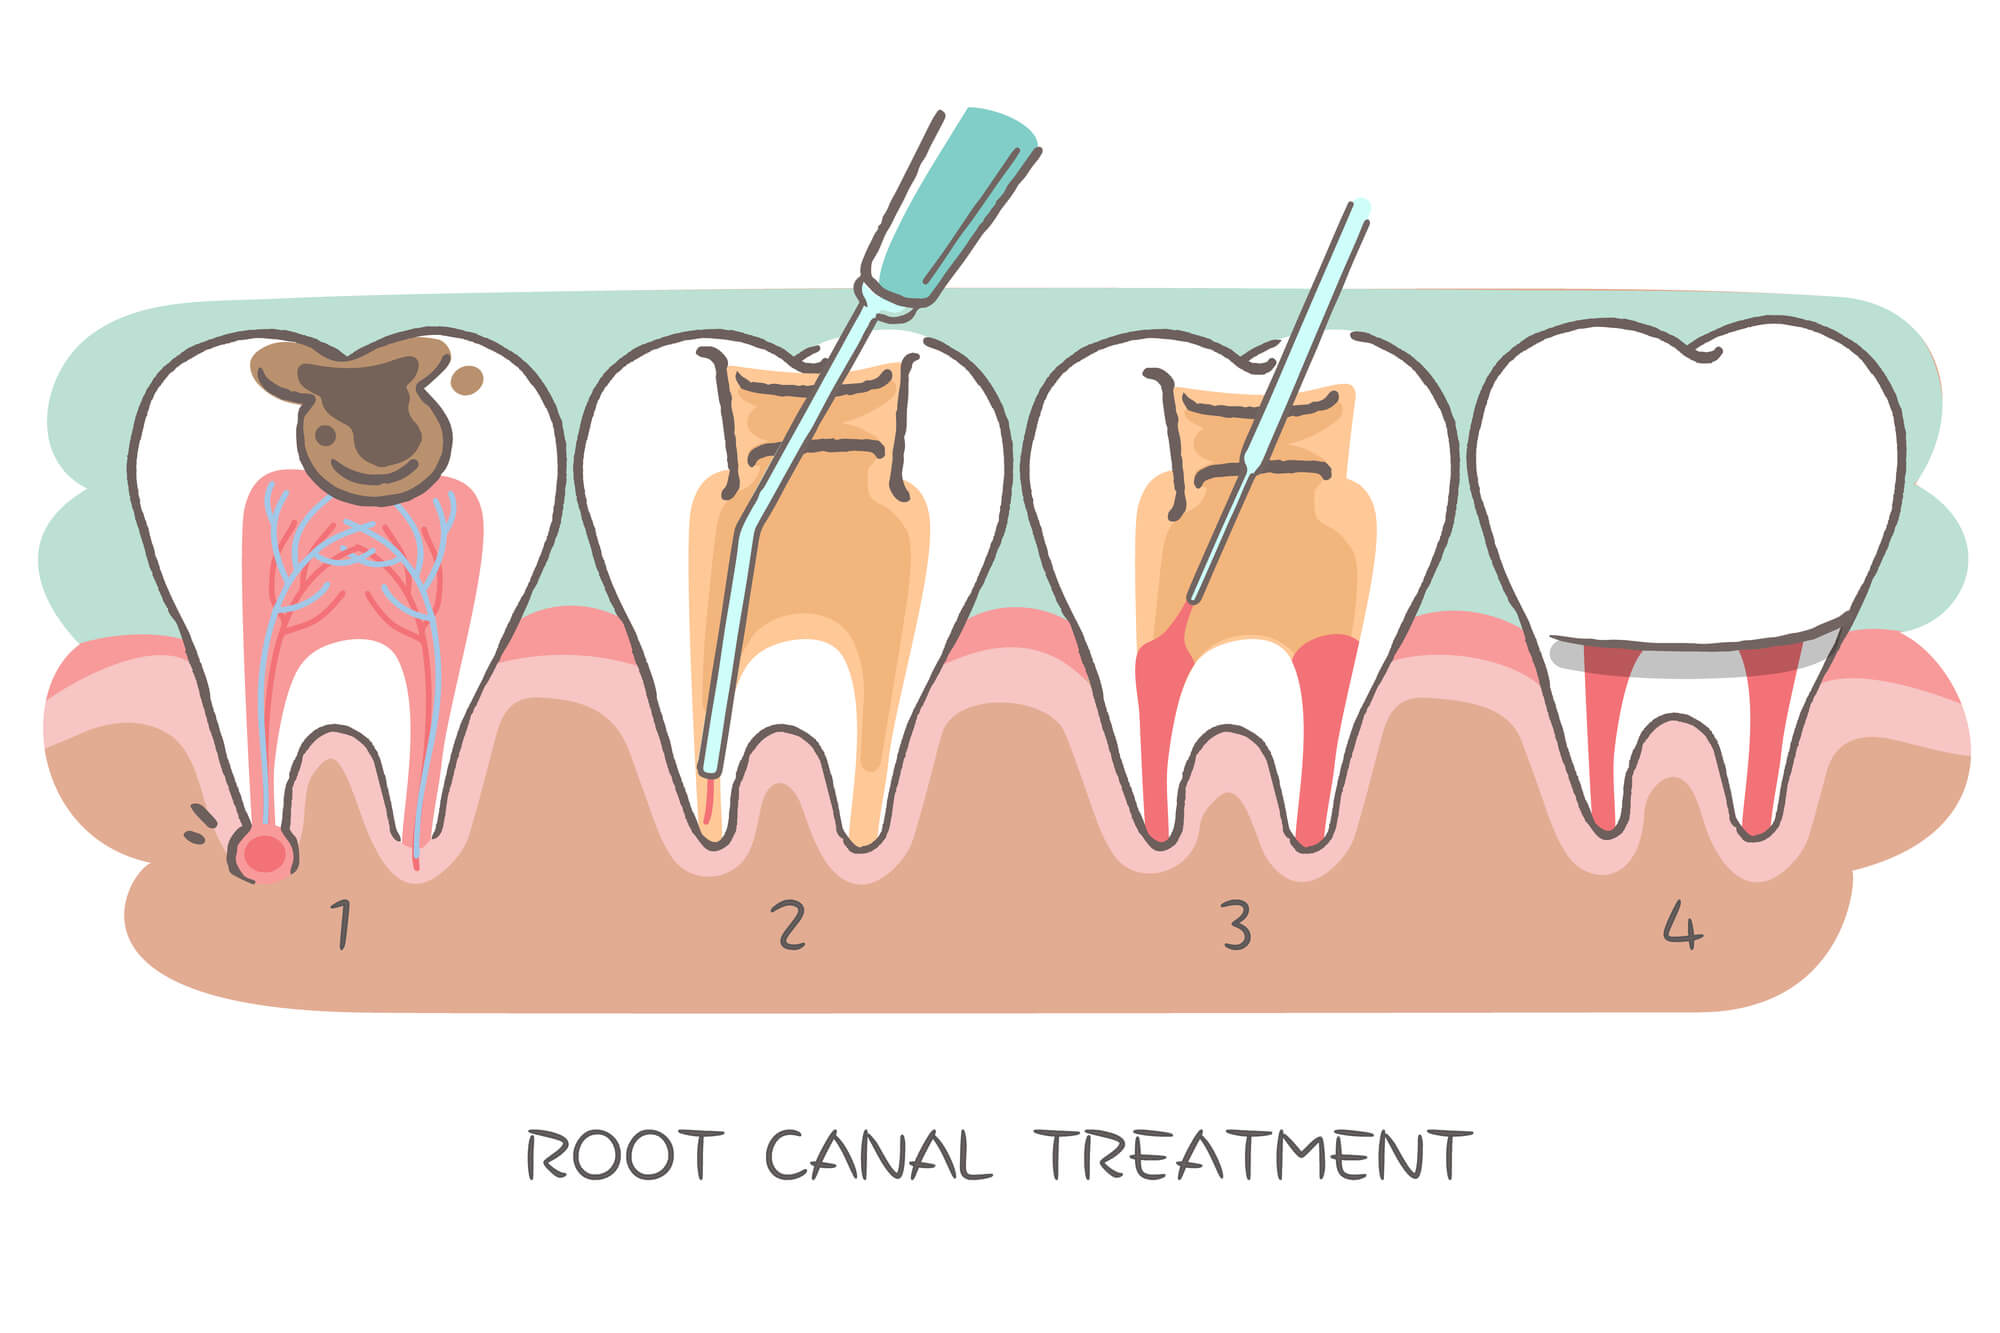 Where can I get a Root canal 98115?